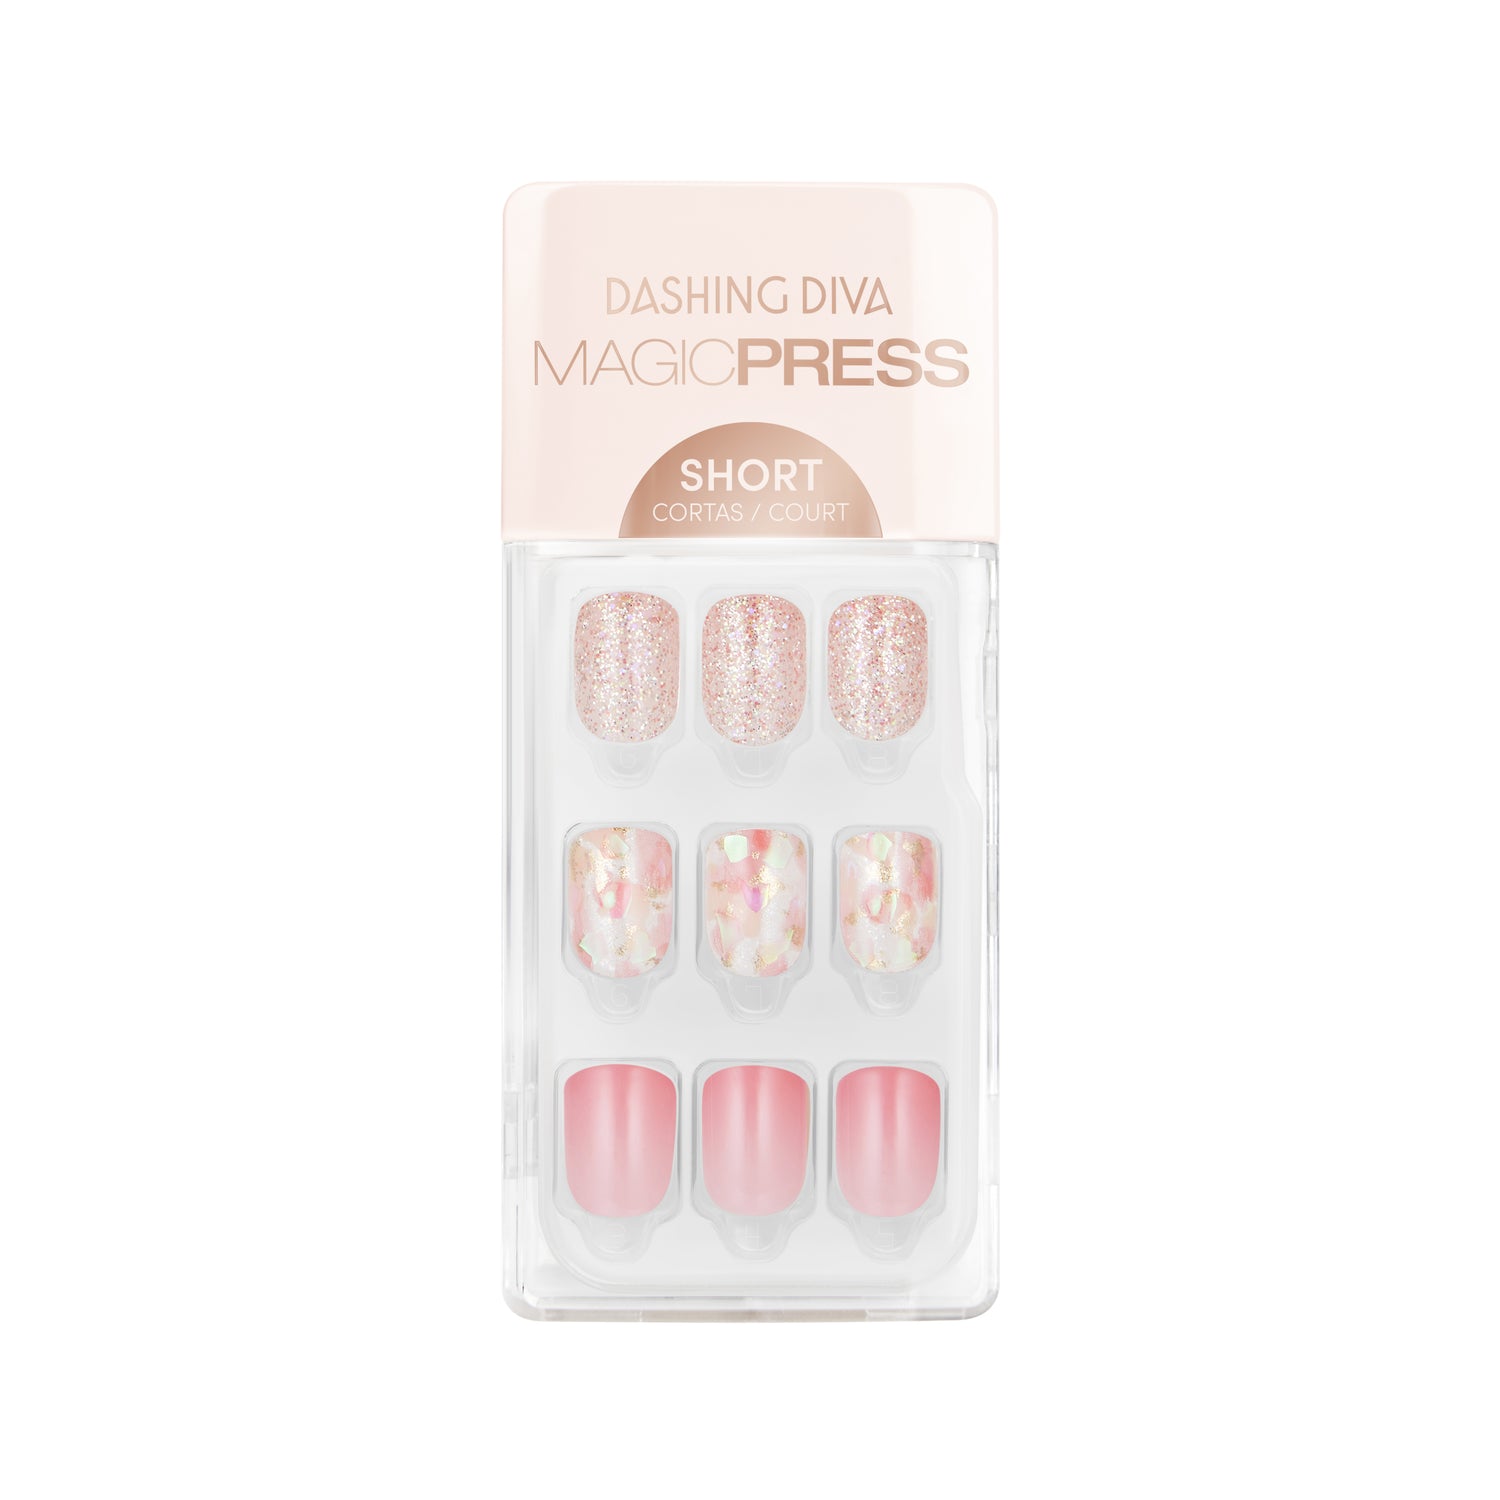 Dashing Diva MAGIC PRESS short, square pink press on gel nails with iridescent marble and pink glitter accents.